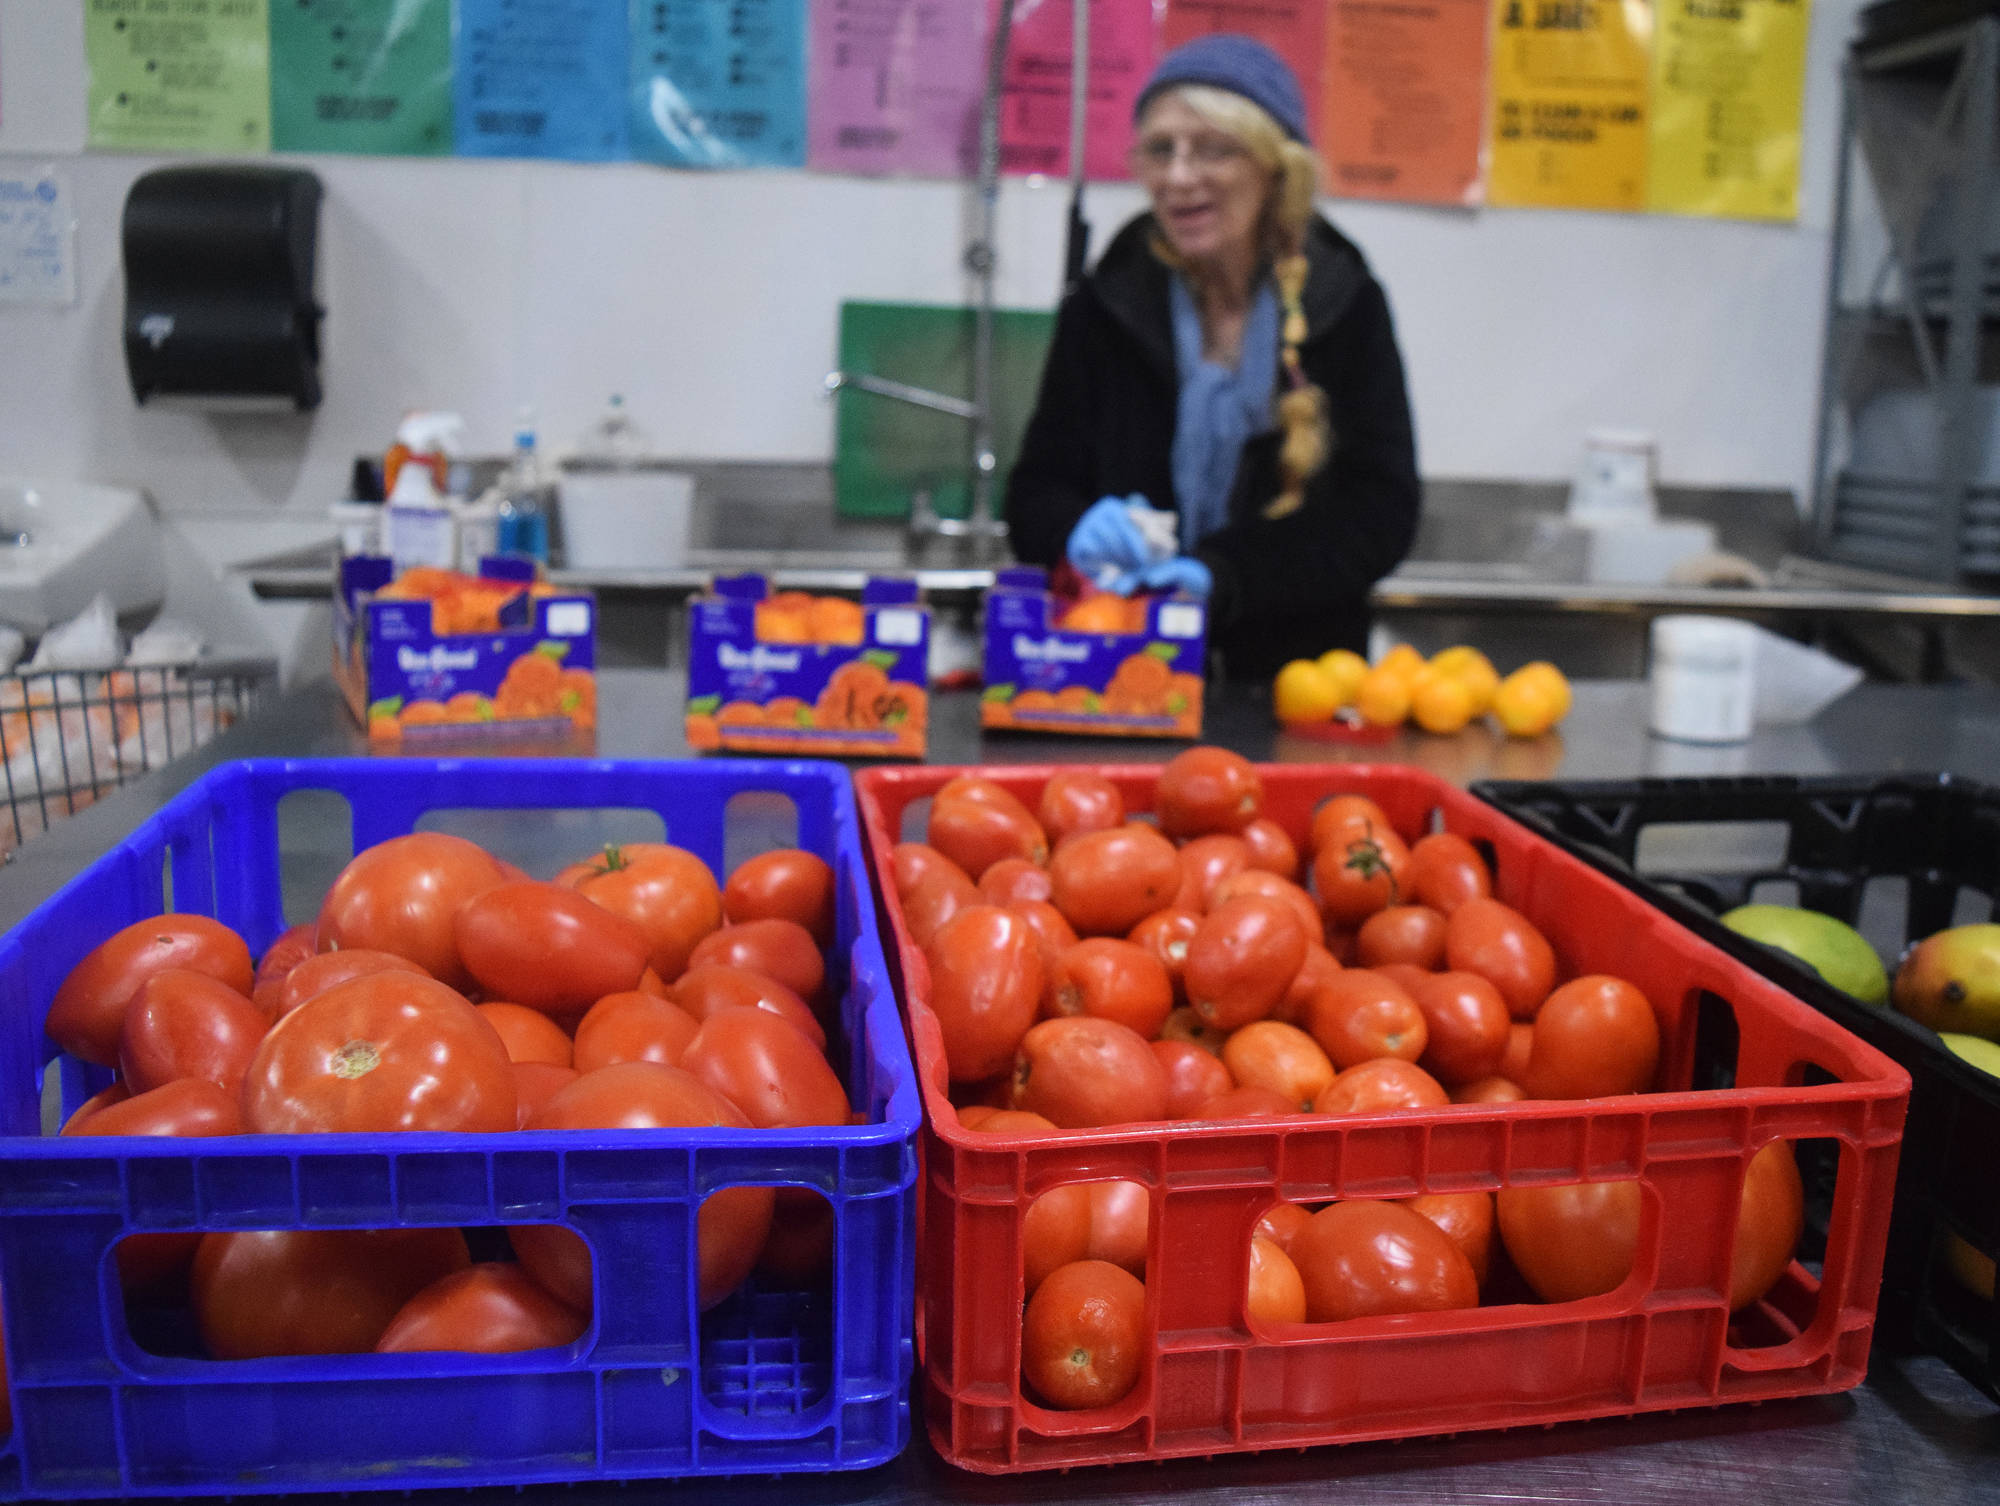 Employee Kyle Wrate shows off tomatoes on Wednesday, Nov. 14 at the Kenai Peninsula Food Bank on K-Beach Road. The tomatoes will be used in this week’s Thanksgiving meal at the food bank. (Photo by Joey Klecka/Peninsula Clarion)